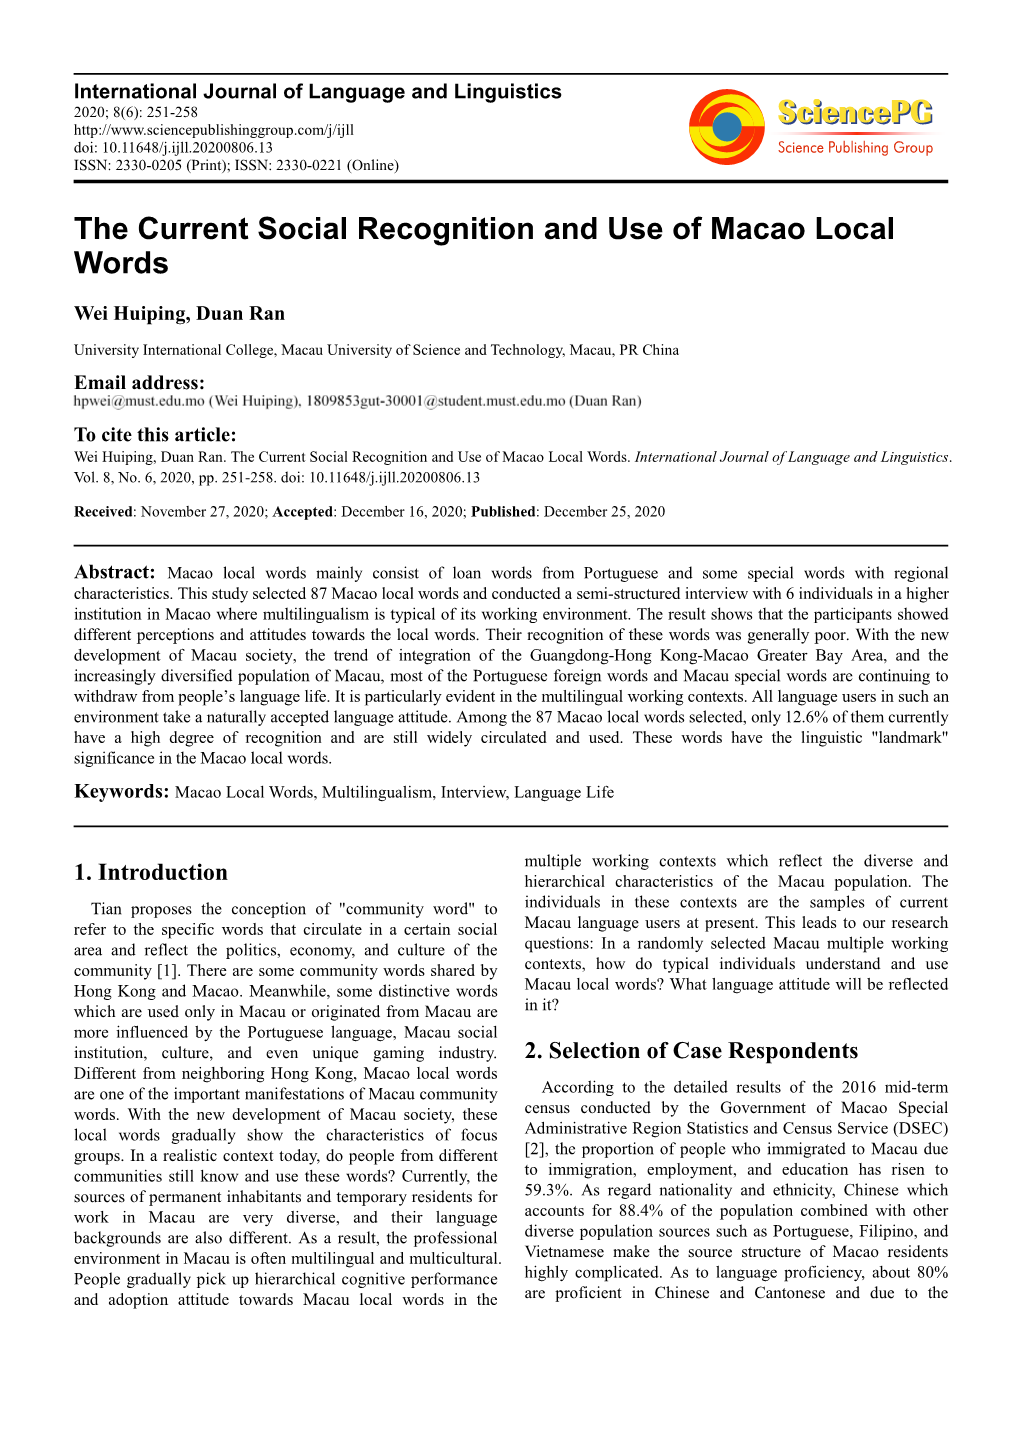 The Current Social Recognition and Use of Macao Local Words